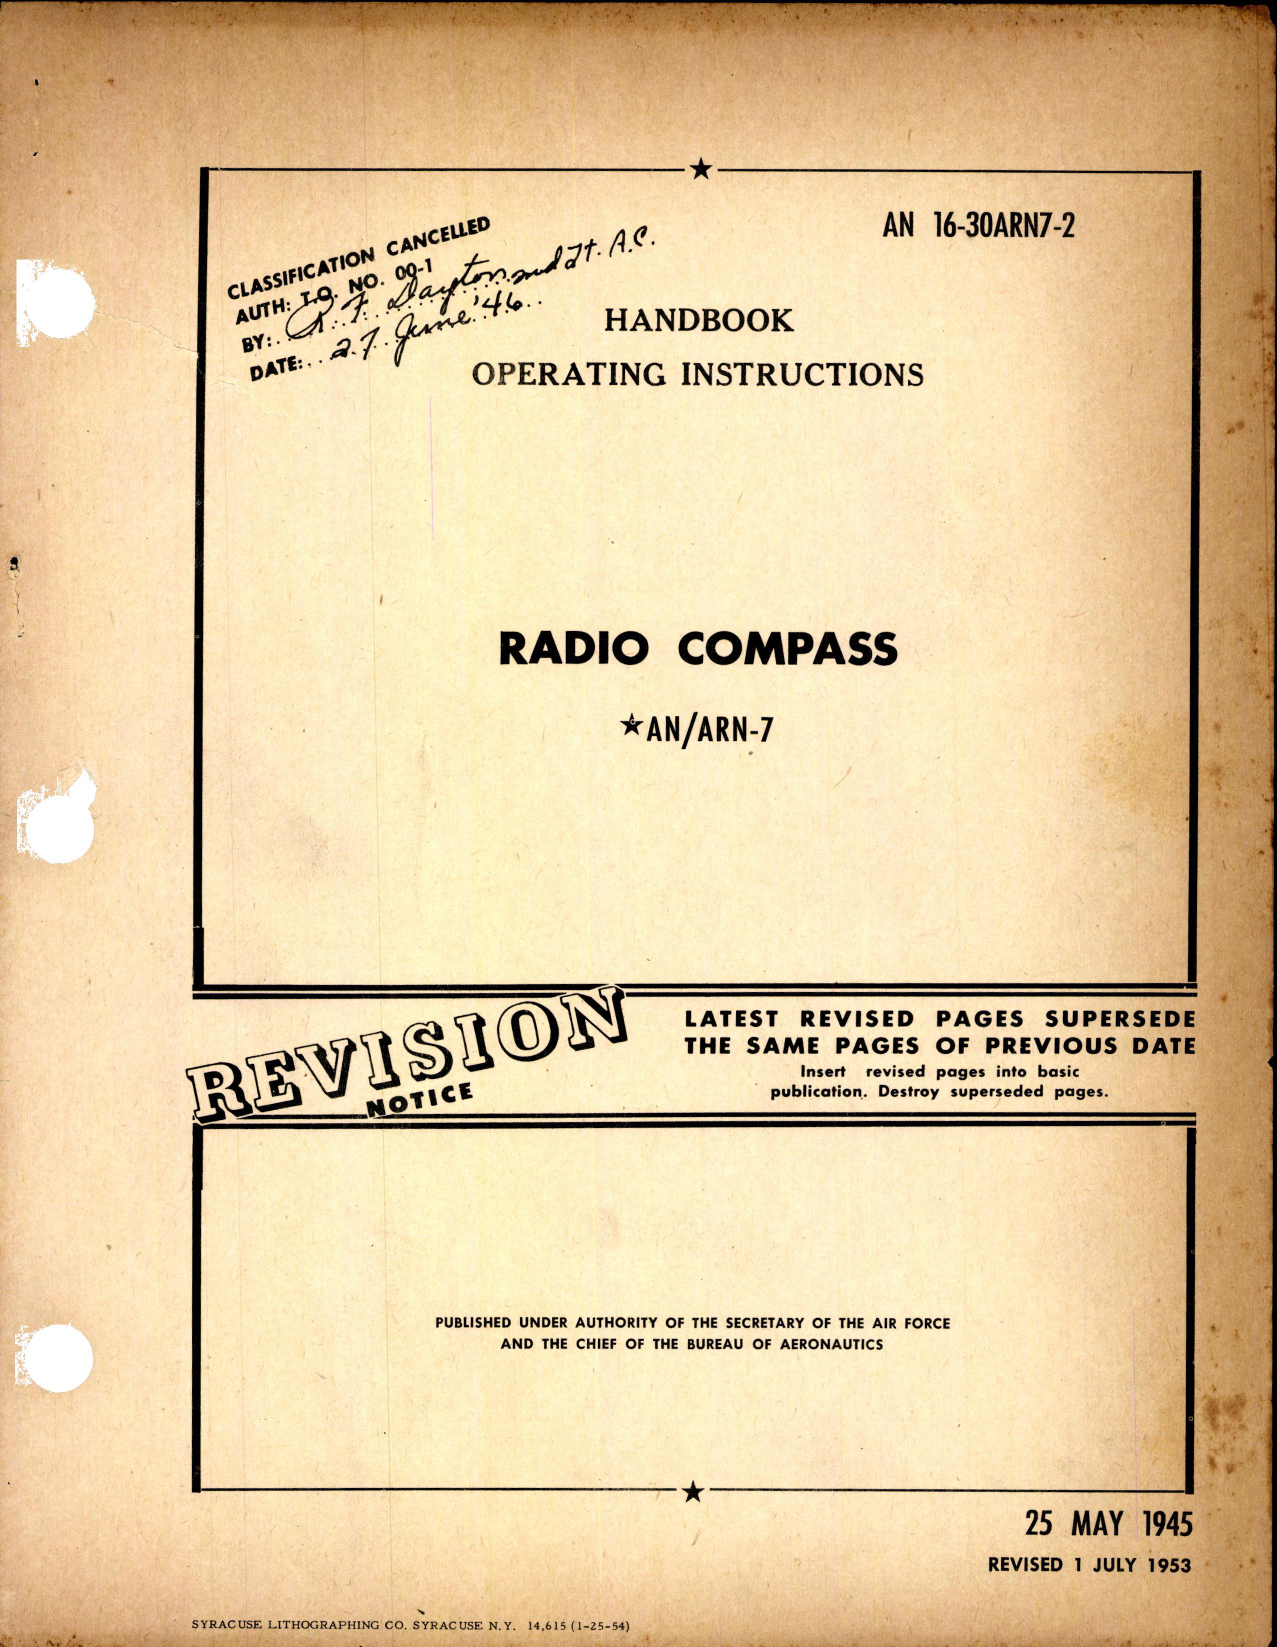 Sample page 1 from AirCorps Library document: Handbook Operating Instructions for Radio Compass AN & ARN-7